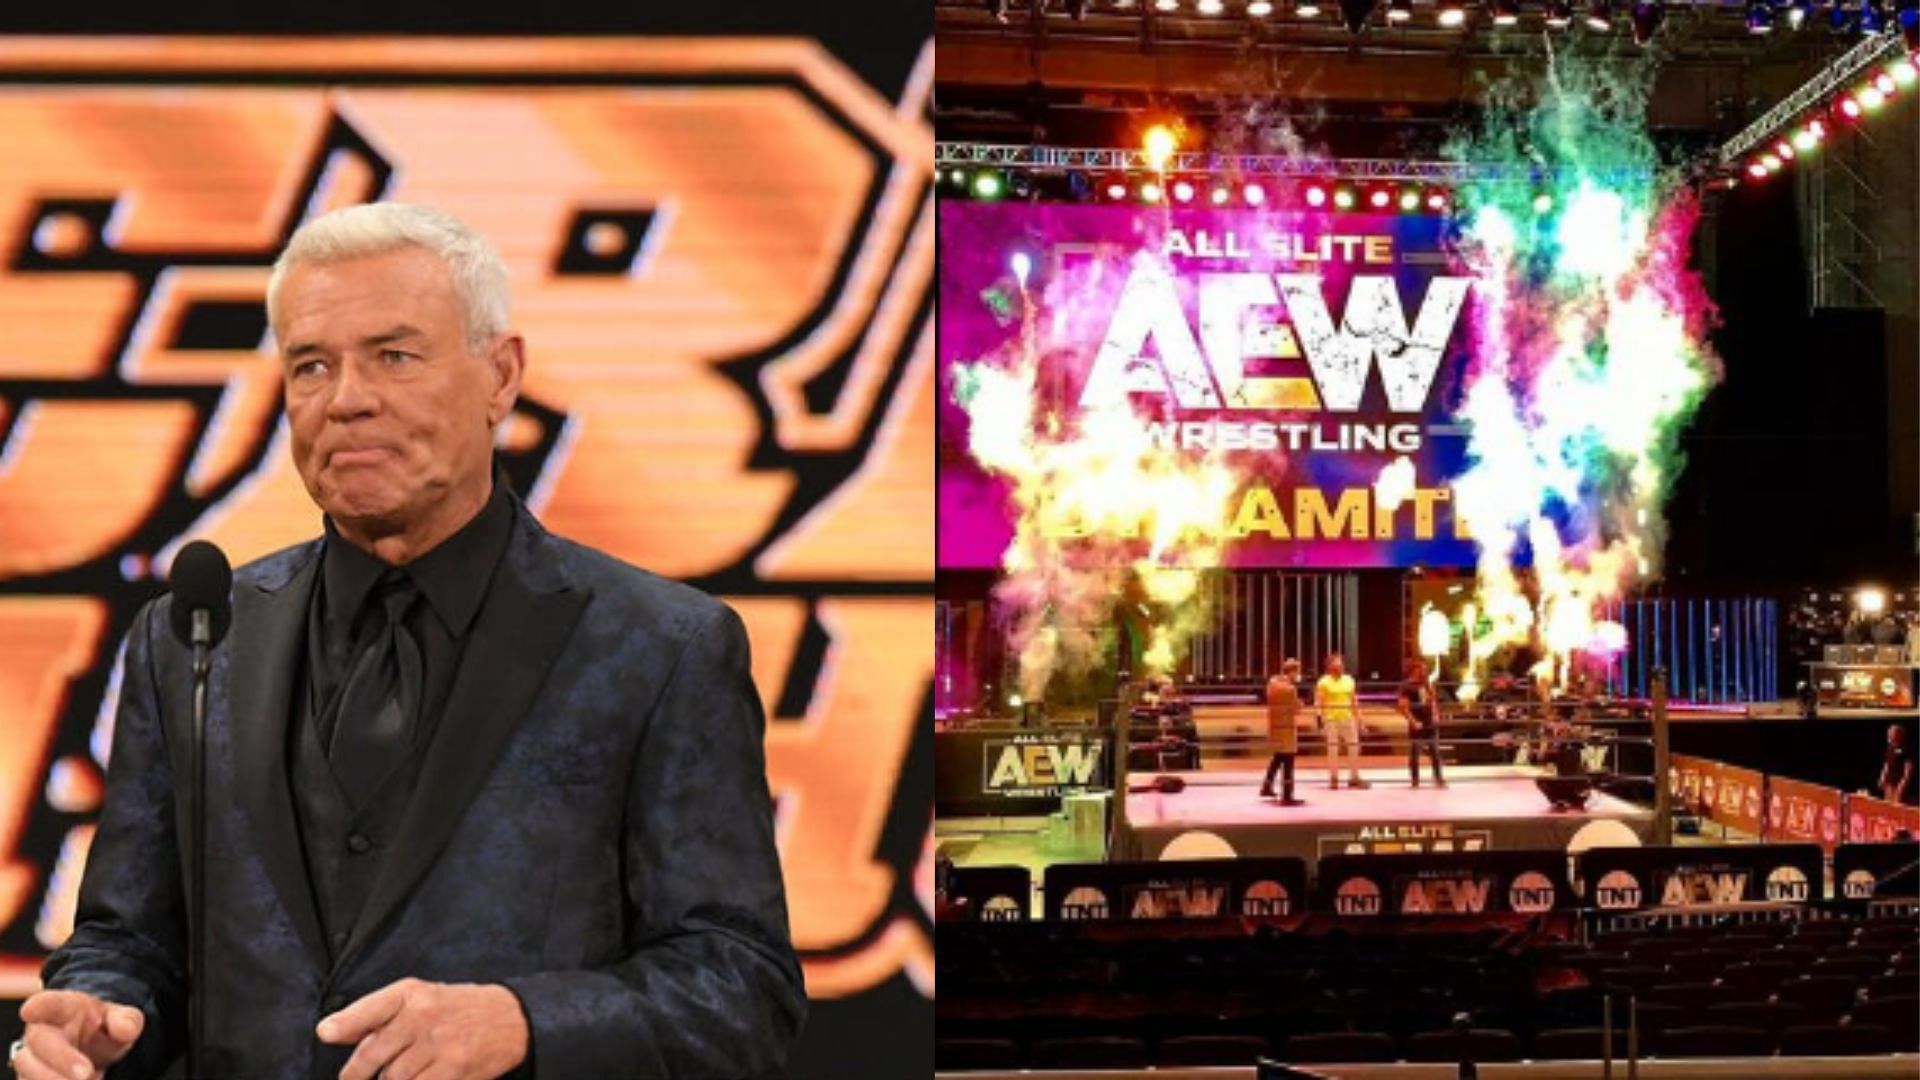 Eric Bischoff is a former wrestling promoter and executive [Image Credits: AEW